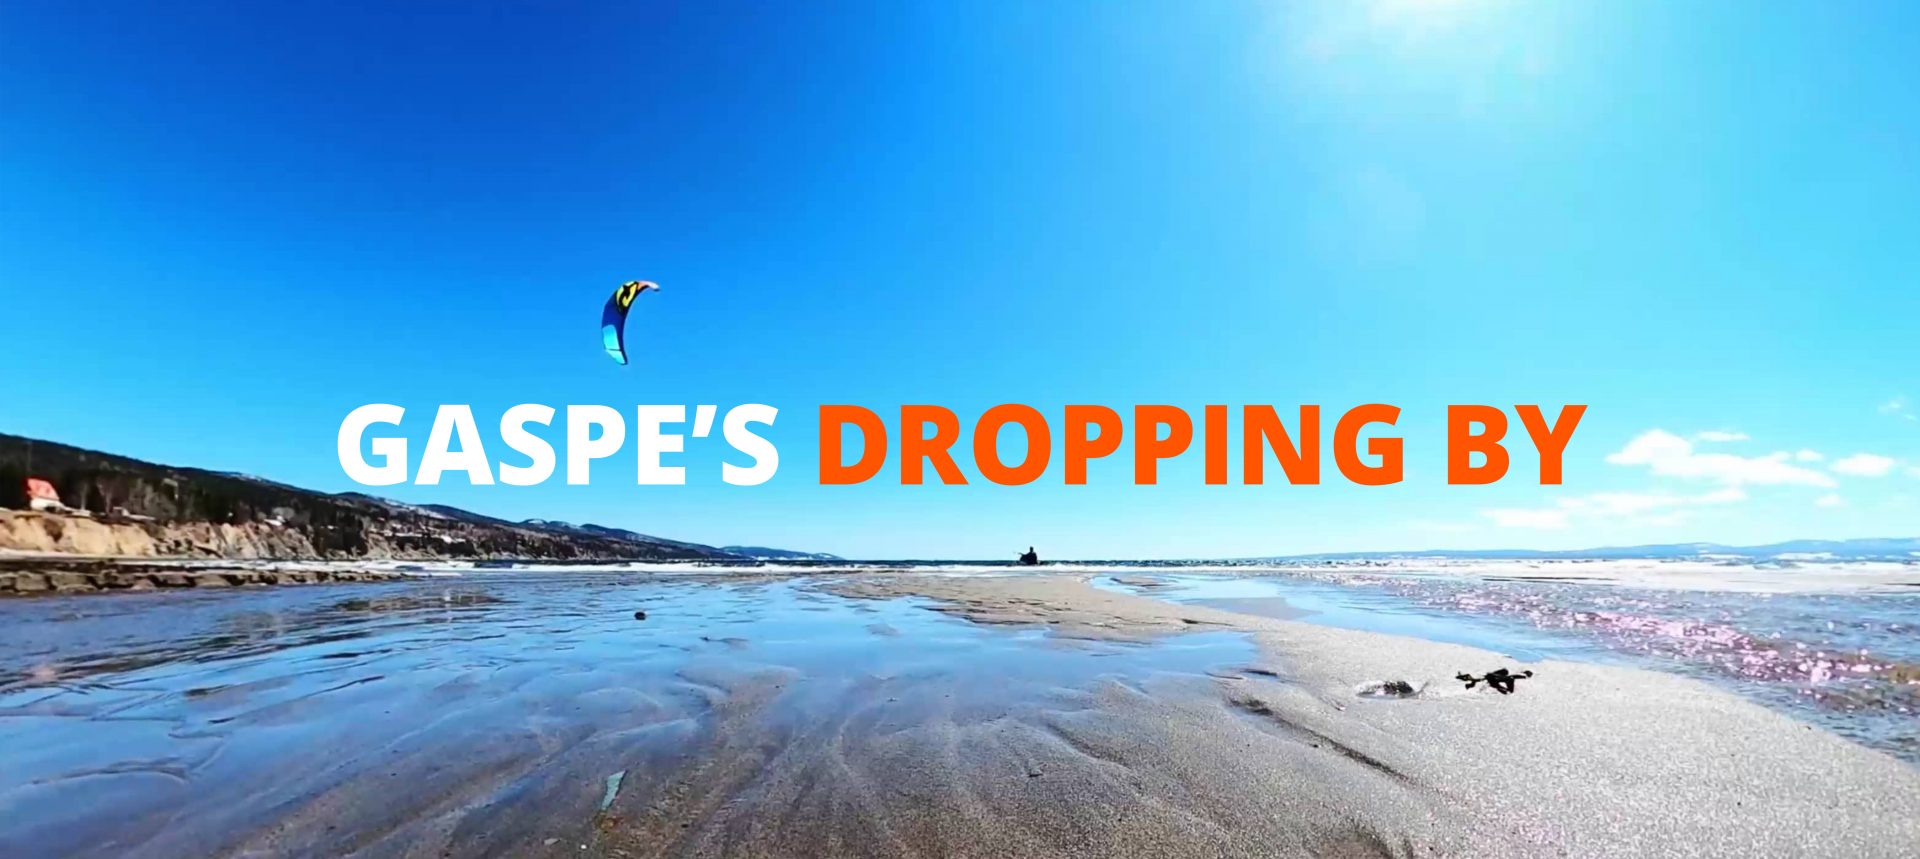 Gaspe's dropping by : The beach at home